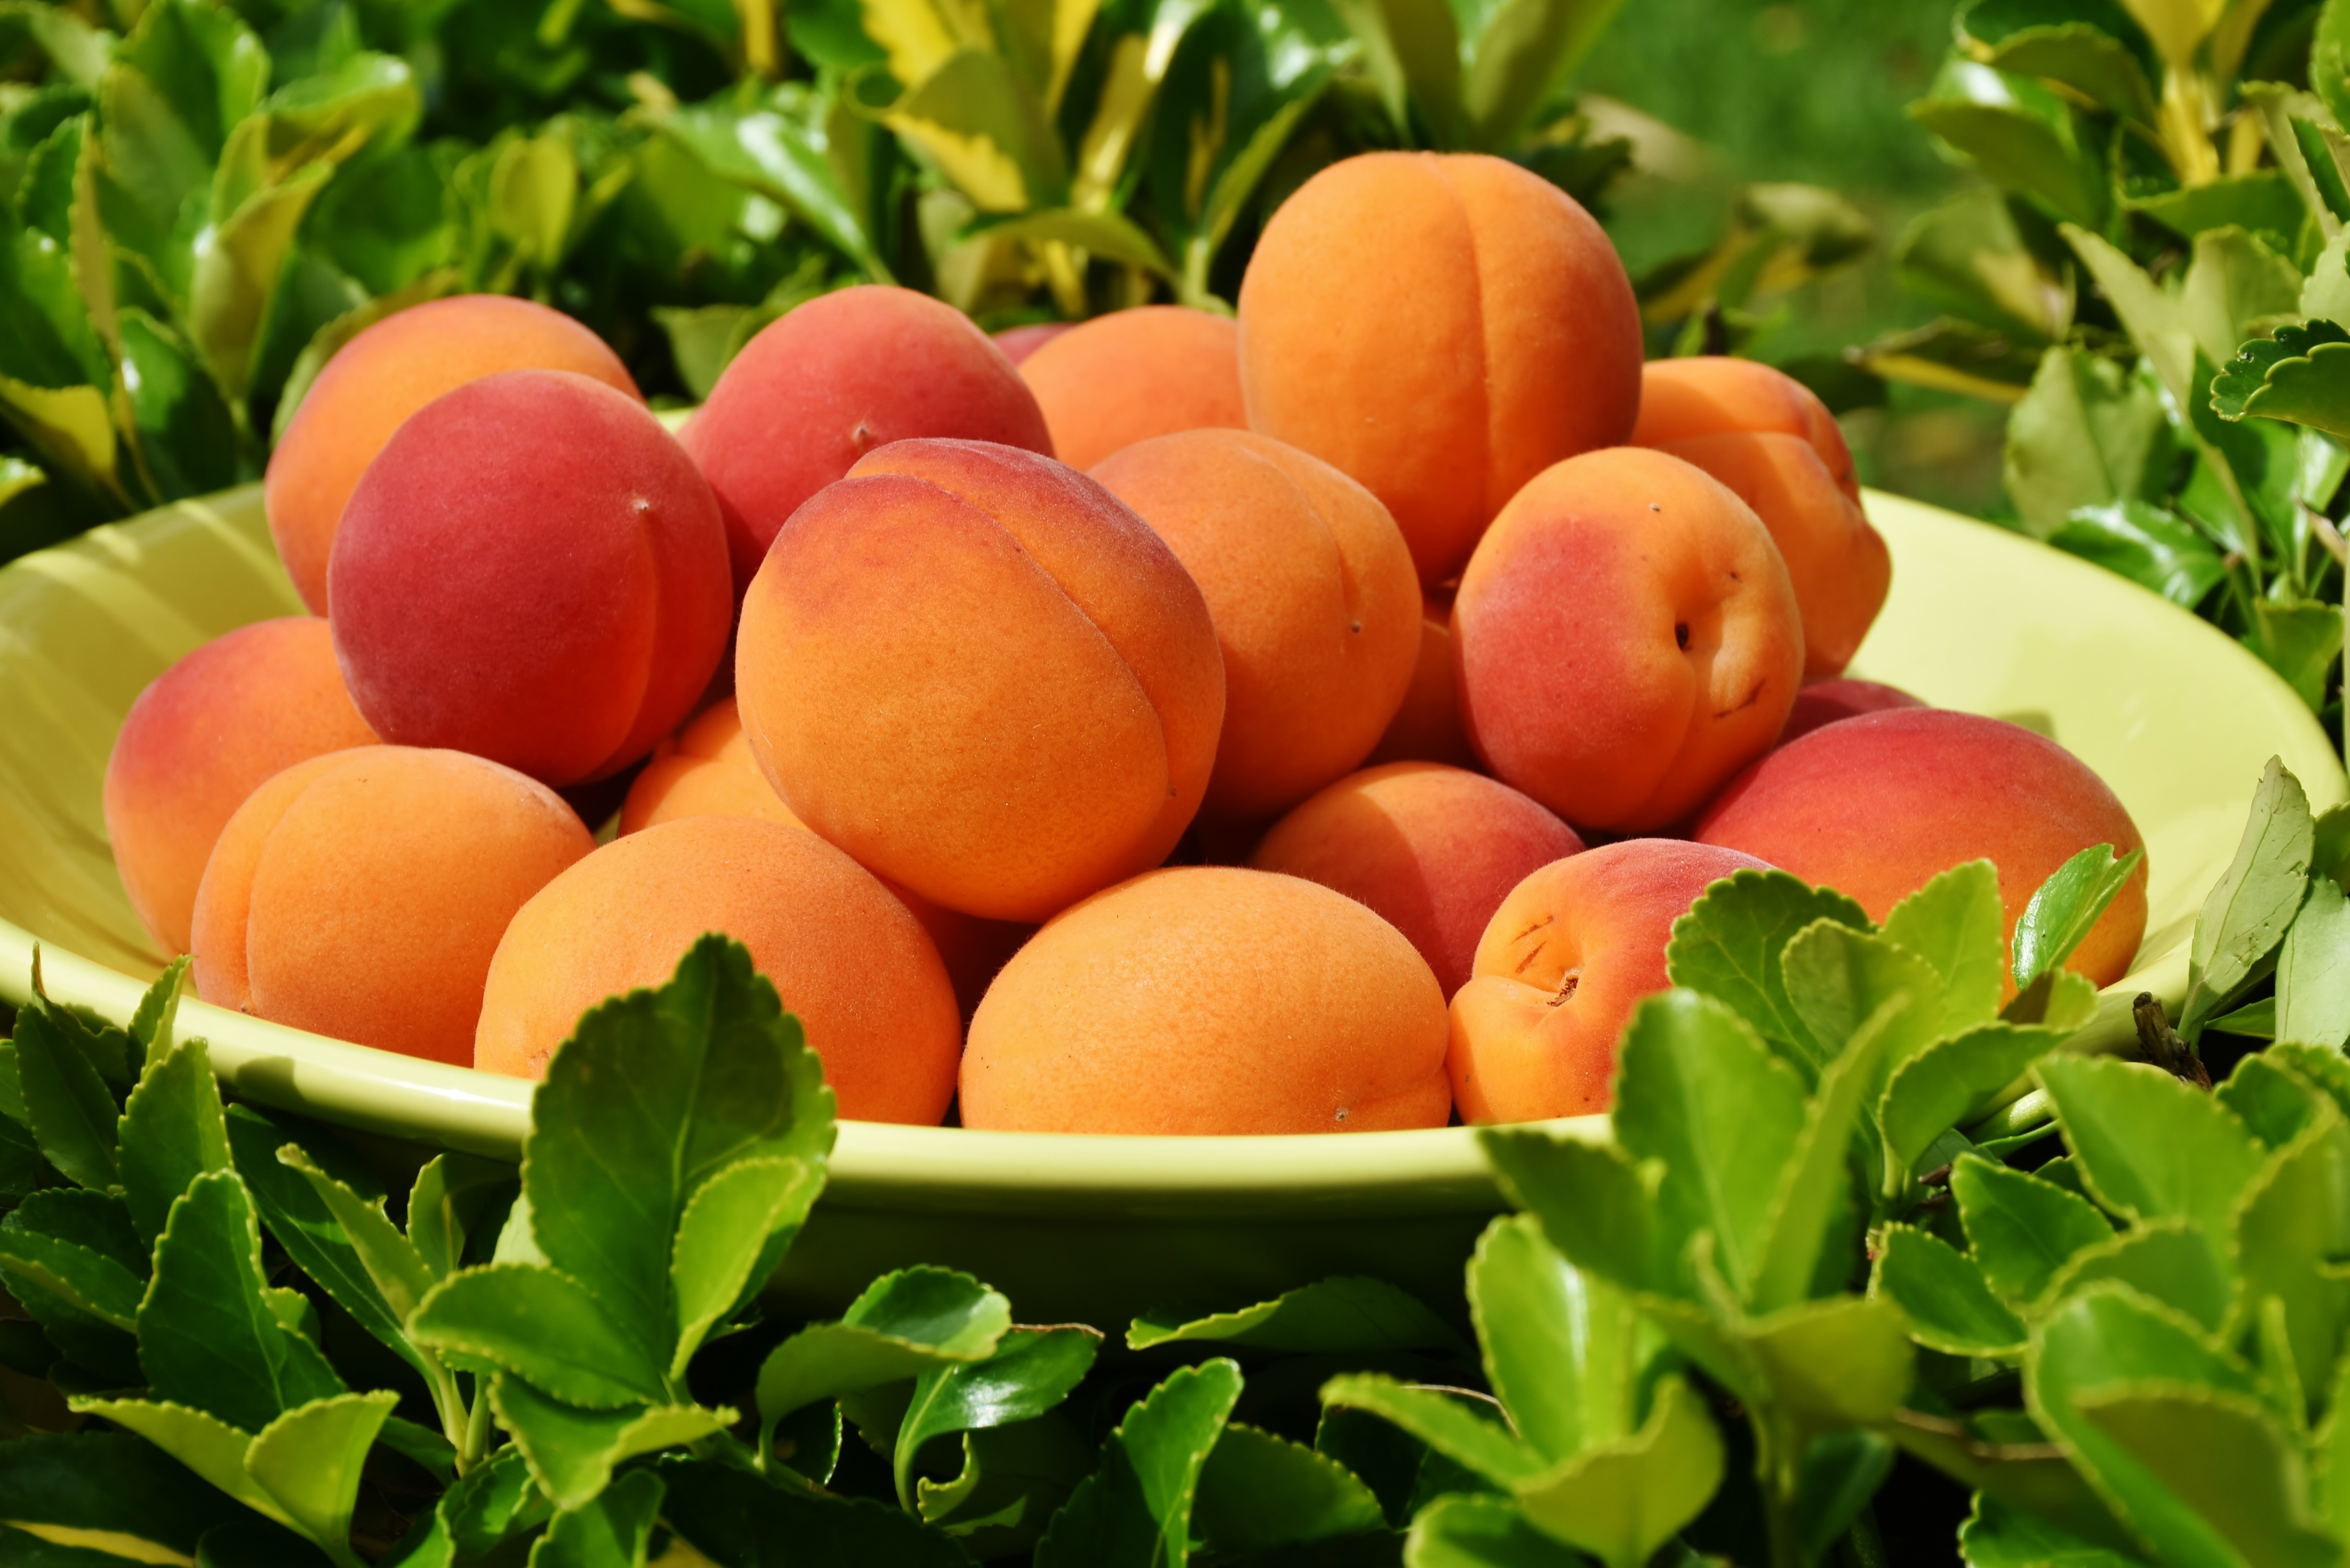 71356 download wallpaper fruits, food, leaves, plate, apricot screensavers and pictures for free